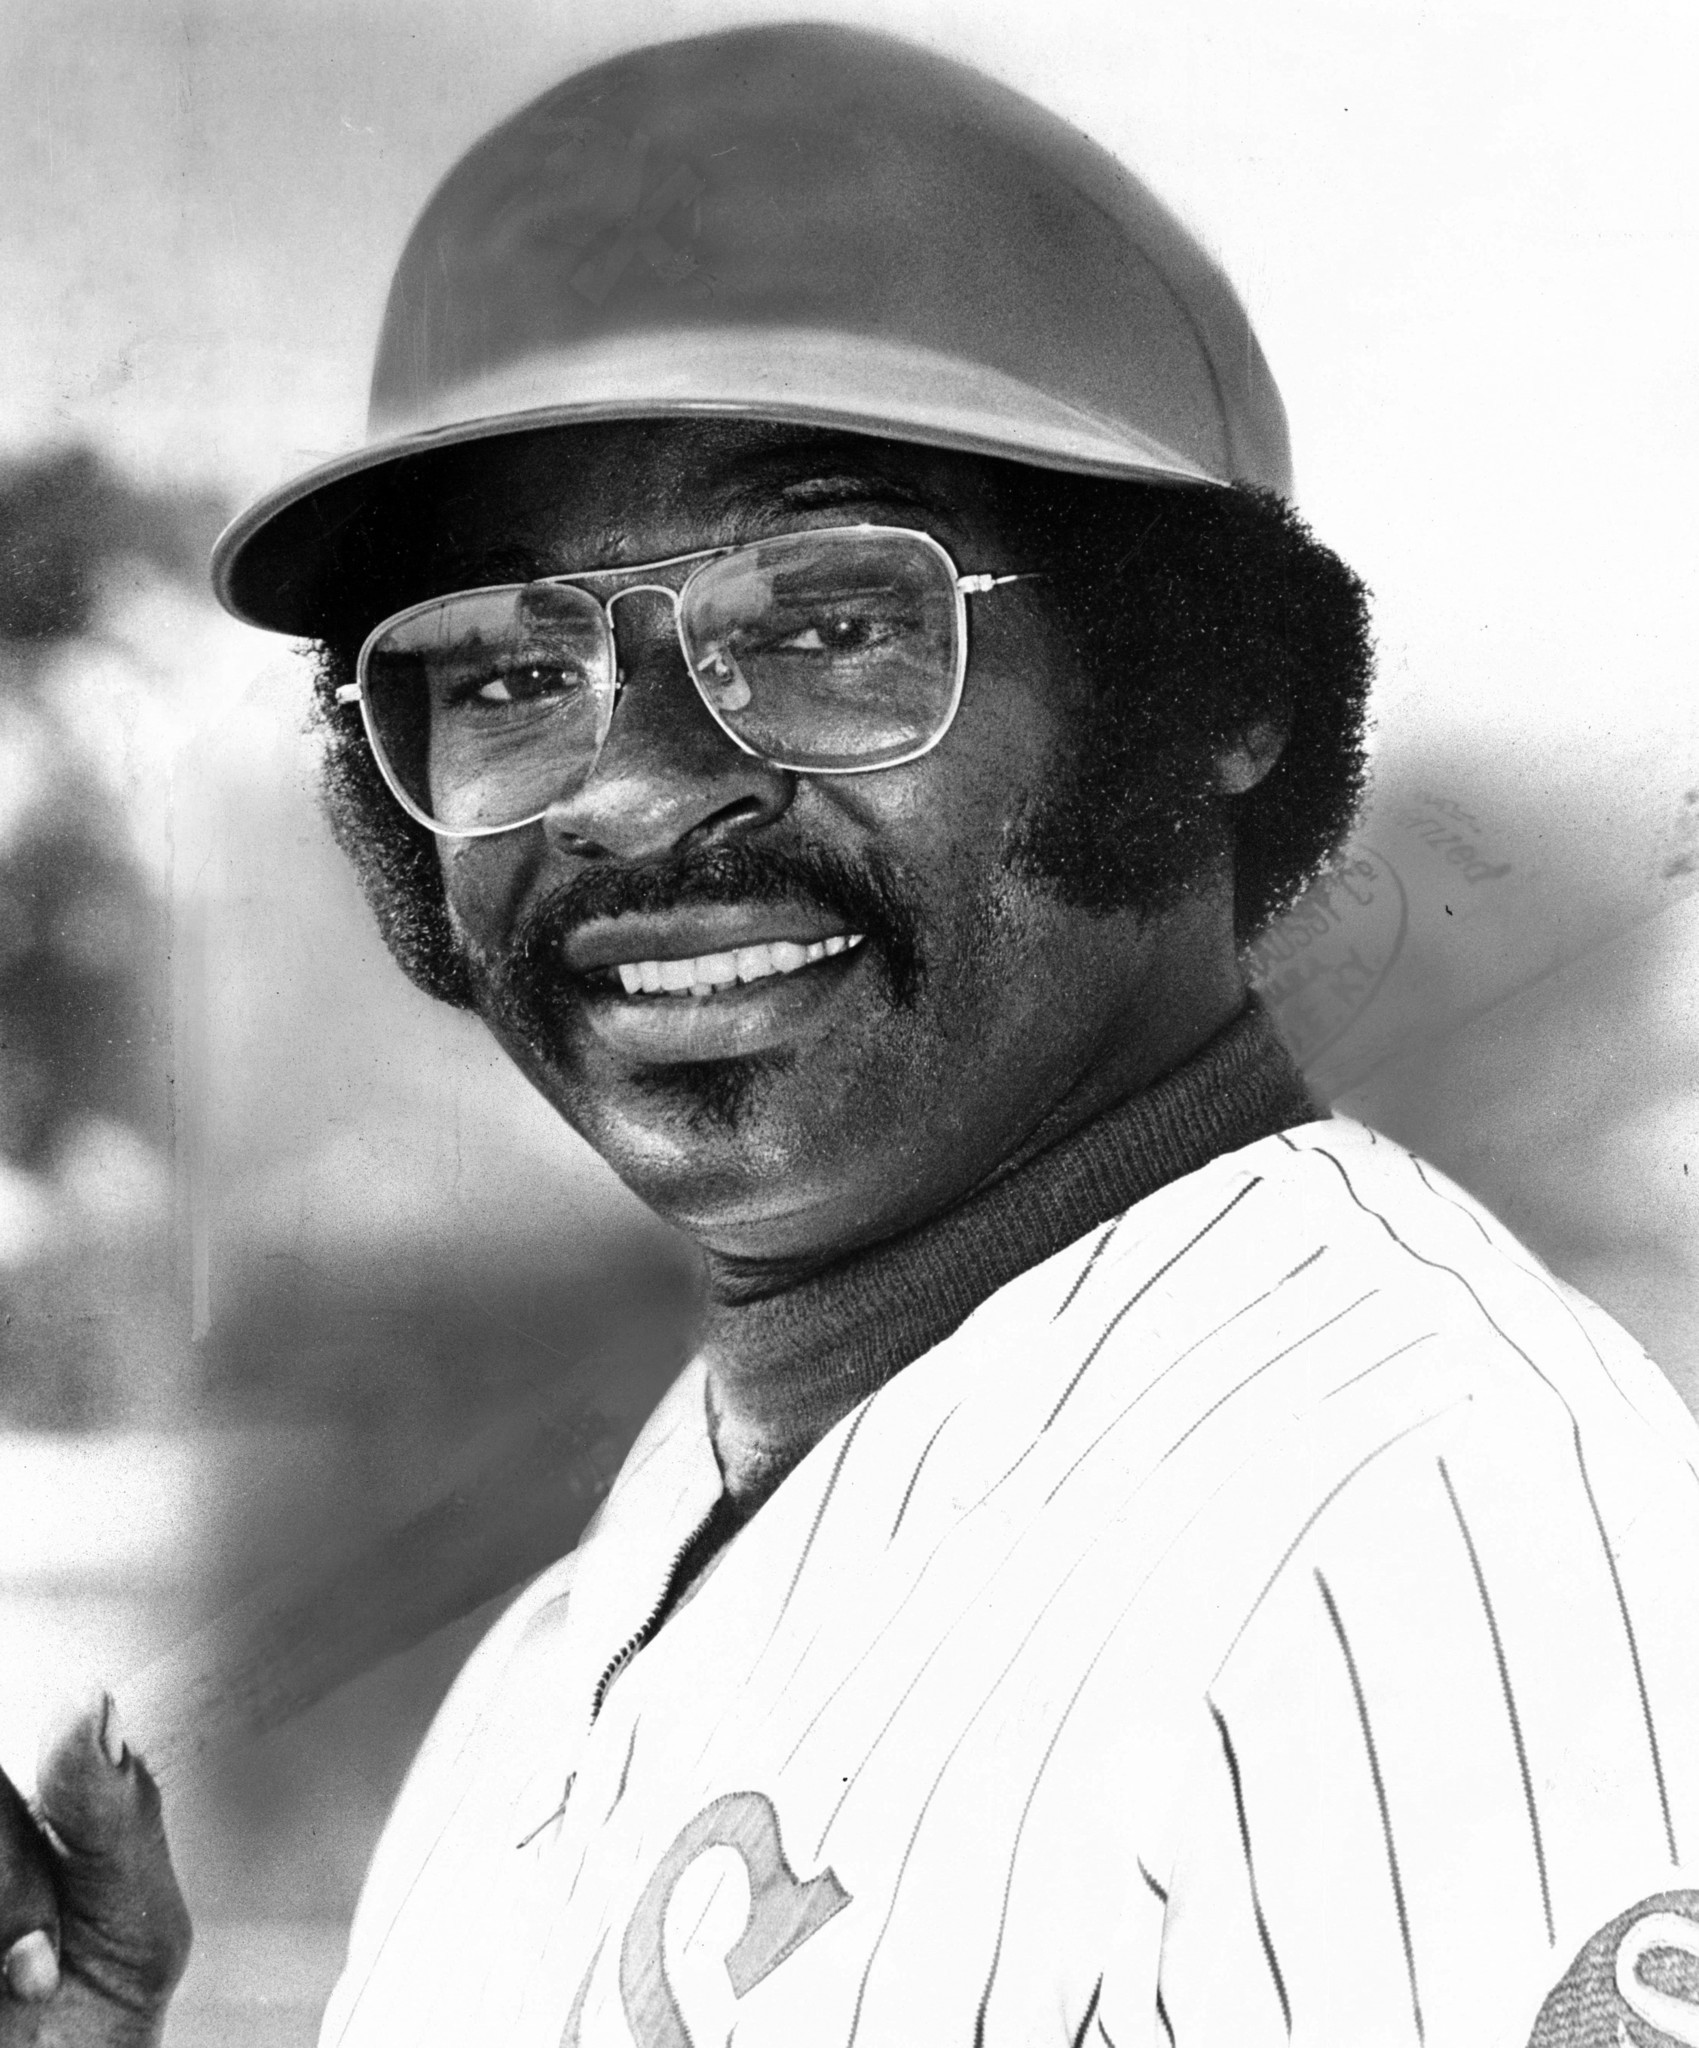 Dick Allen, Fearsome Hitter and 7-Time All-Star, Dies at 78, Chicago News